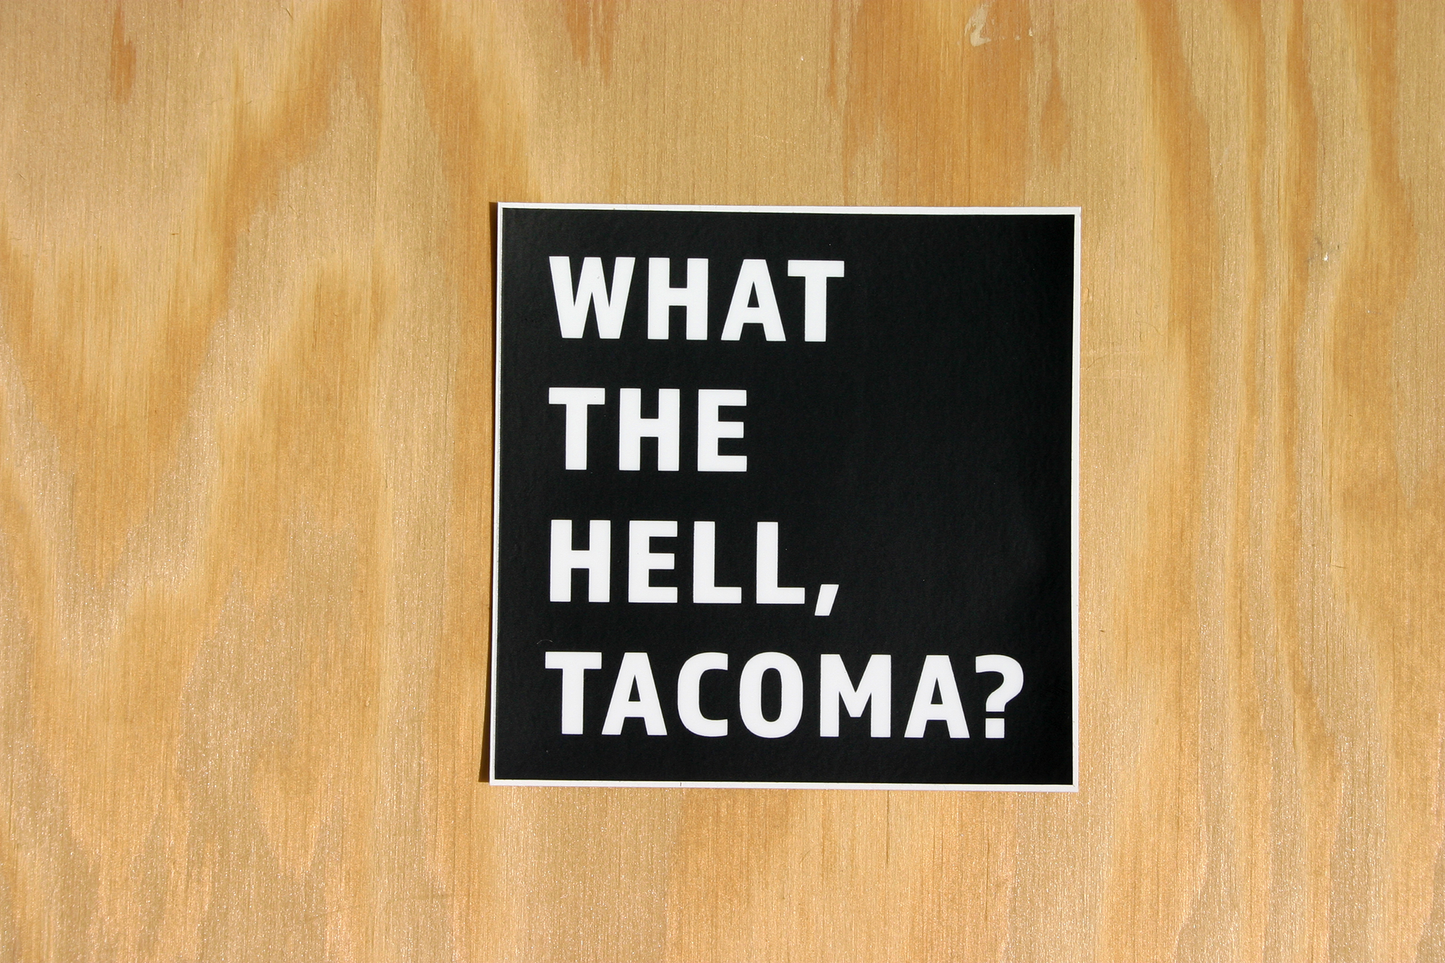 What The Hell, Tacoma?